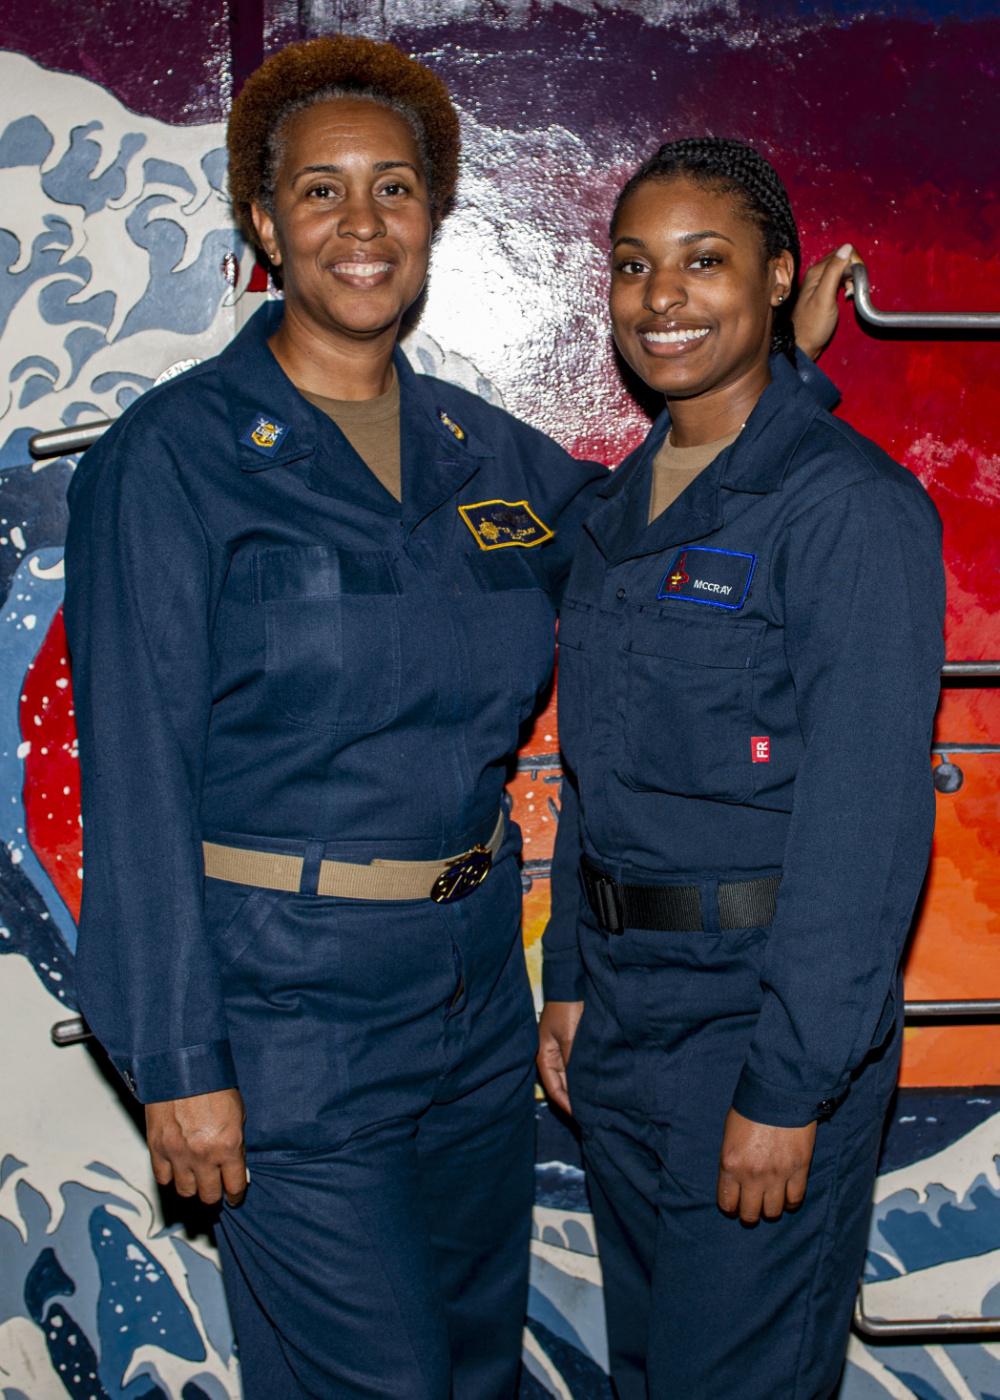 LSSN Racquel McCray (R) says she knew from the age of 18 that she wanted to join the Navy. (Courtesy of Gary Prill via <a href="https://www.dvidshub.net/news/401323/big-boots-fill">DVIDSHUB</a>)